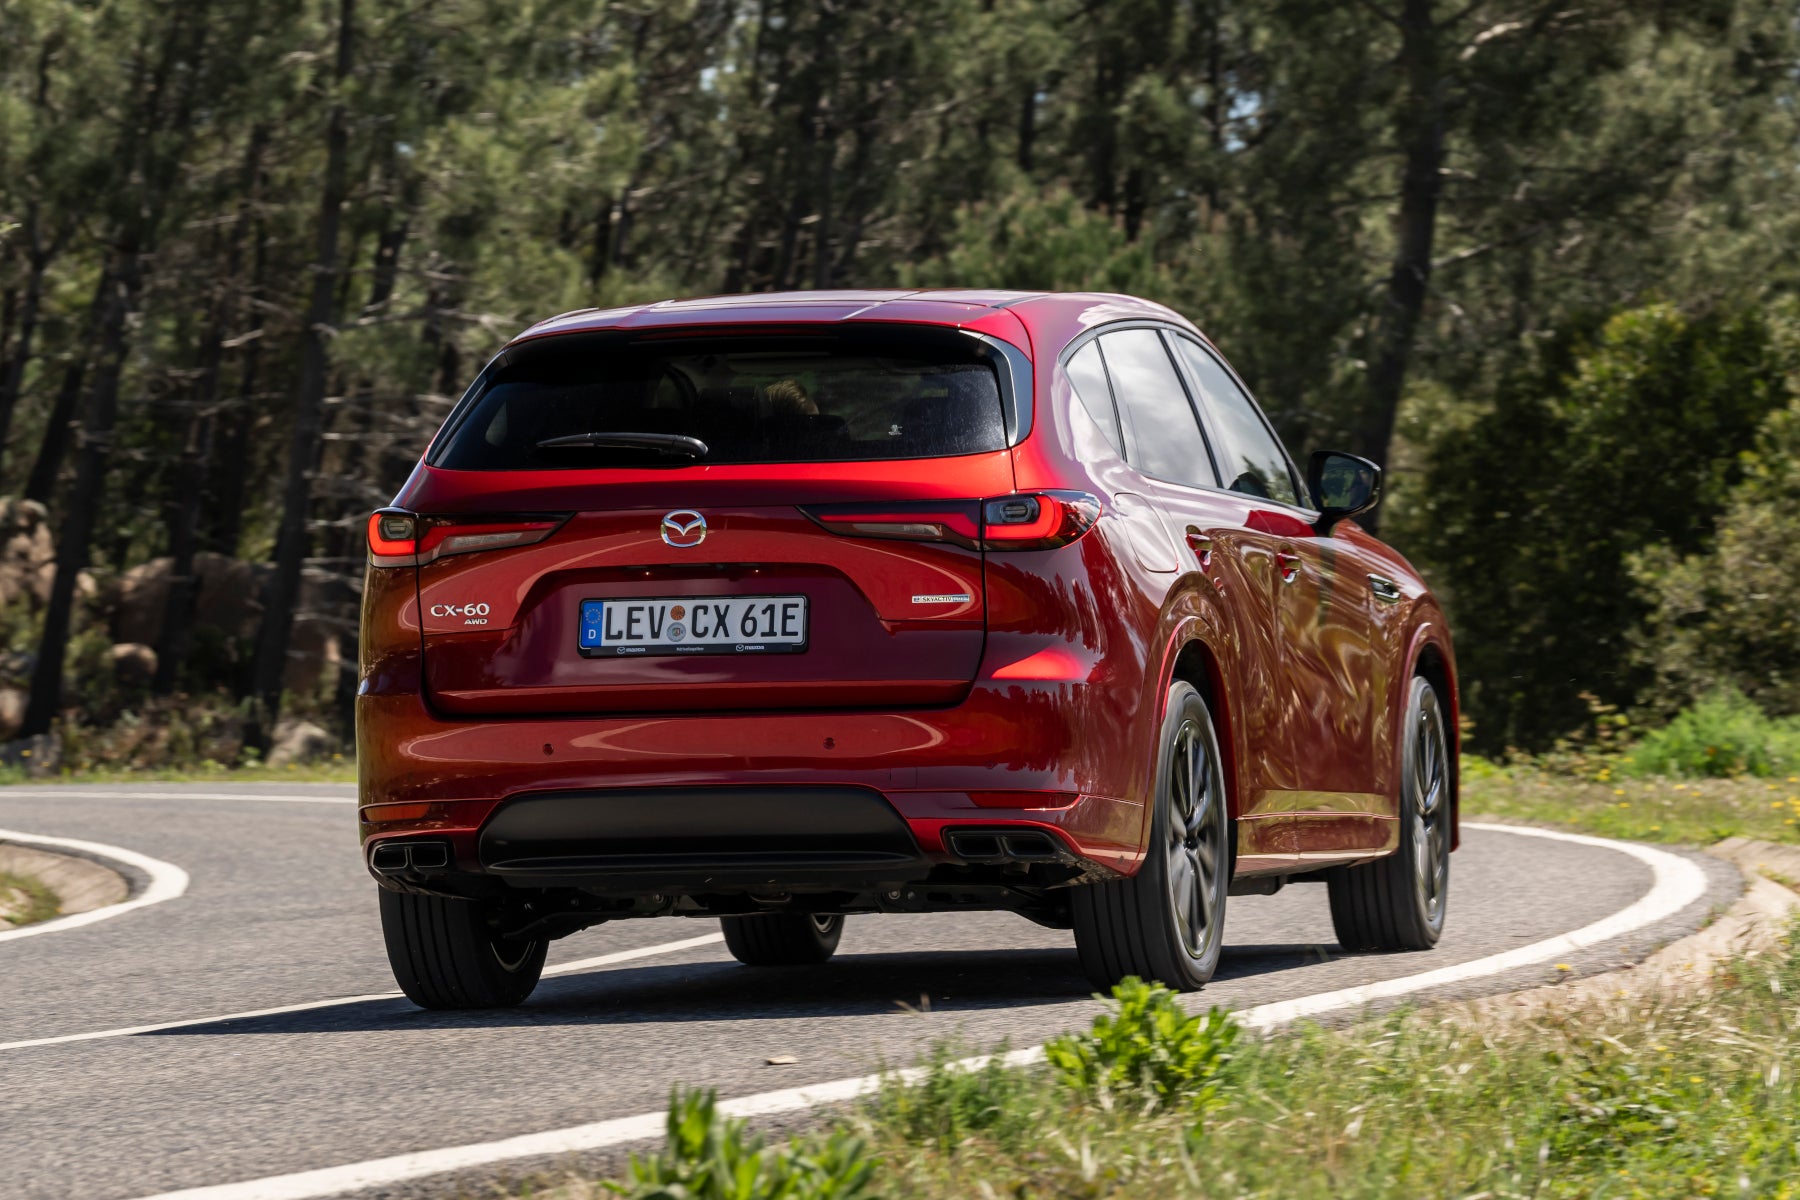 The CX-60 is 190mm longer than a CX-5, but that doesn't mean loads more practicality